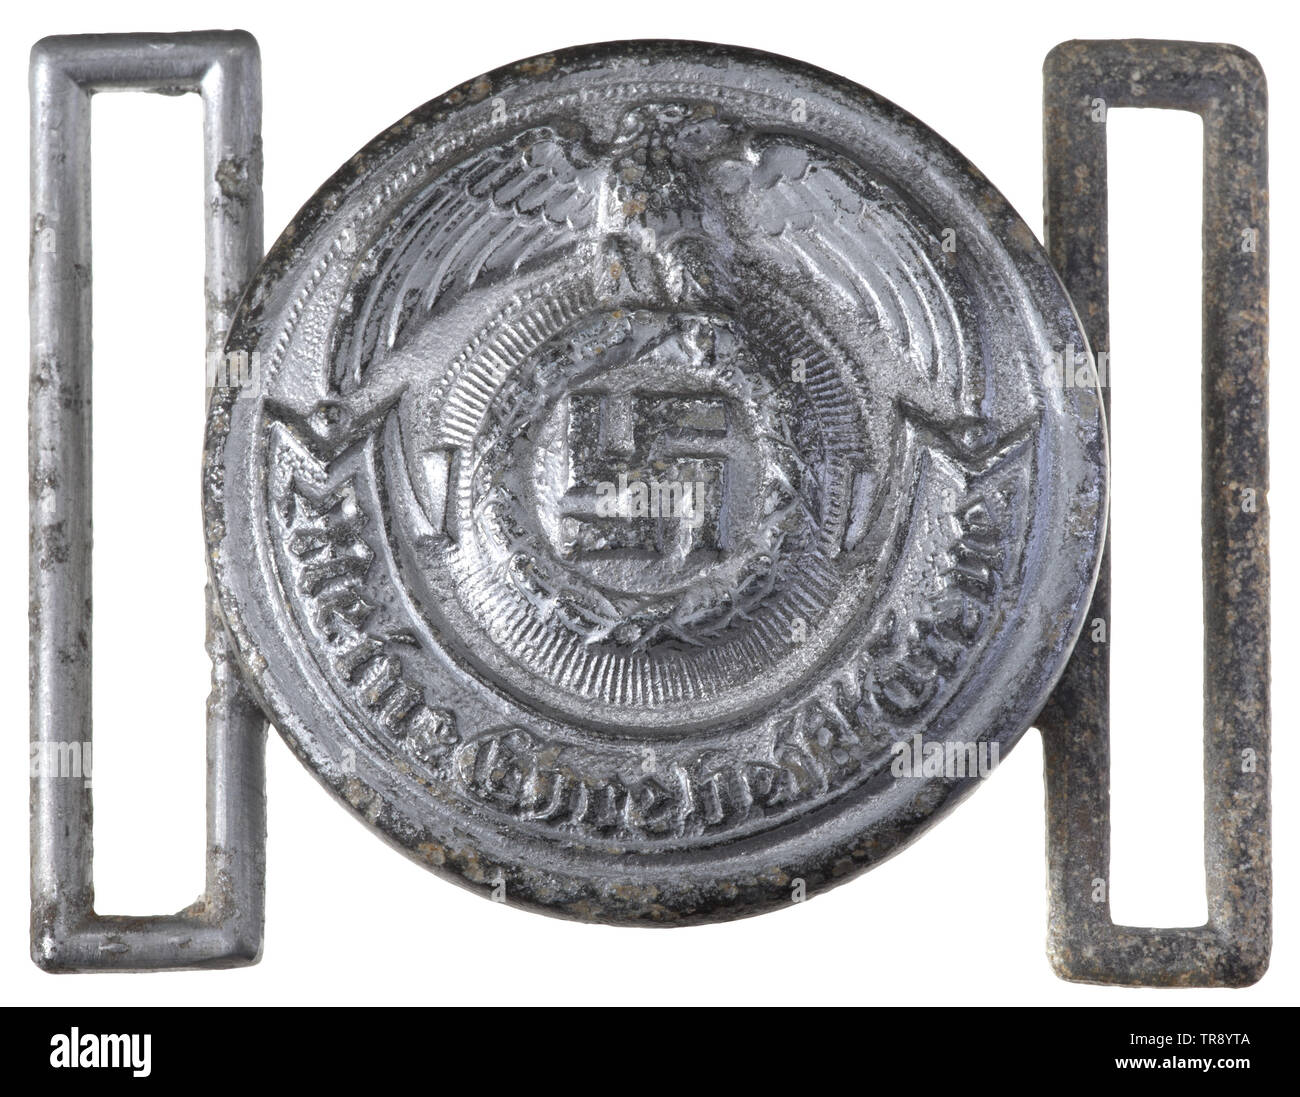 Nazi Germany, Waffen-SS, belt buckle, nickel plated tin, 1940s, frontseide, Editorial-Use-Only Stock Photo